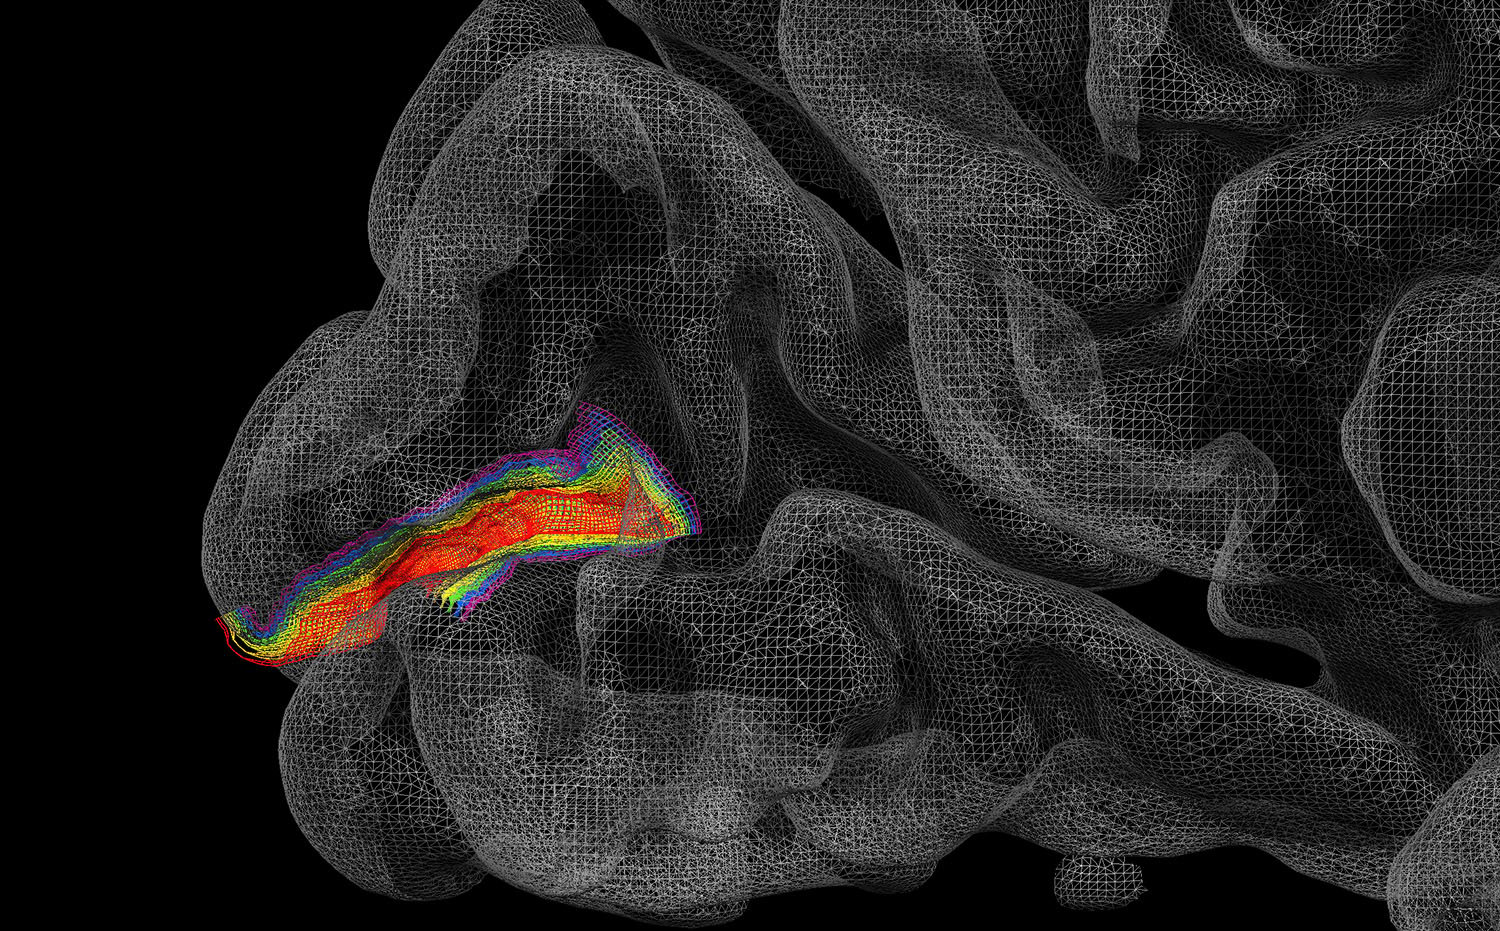 State-of-the-art functional brain imaging techniques allowed Prof. Muckli to investigate the human brain at sub-millimetre resolutions.